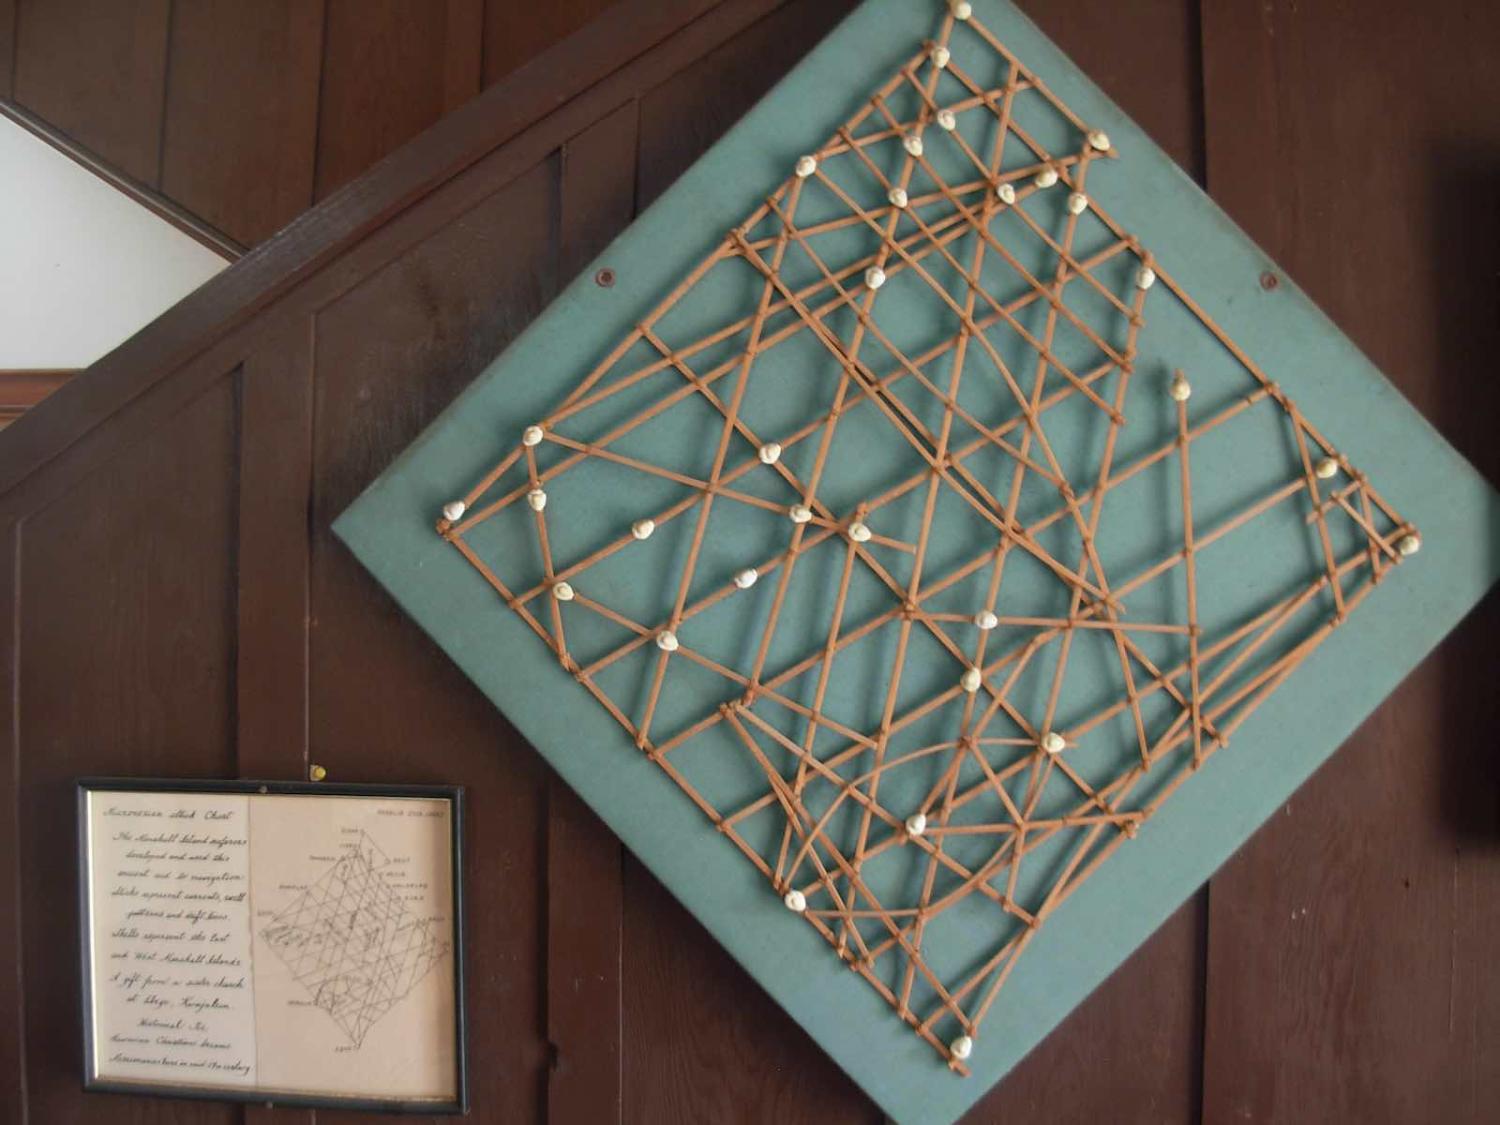 A Micronesian stick chart from Marshall Islands, which ancient seafarers developed and used to aid navigation. Sticks represent currents, swell patterns and drift lines, while shells represent the islands (brewbooks/Flickr)